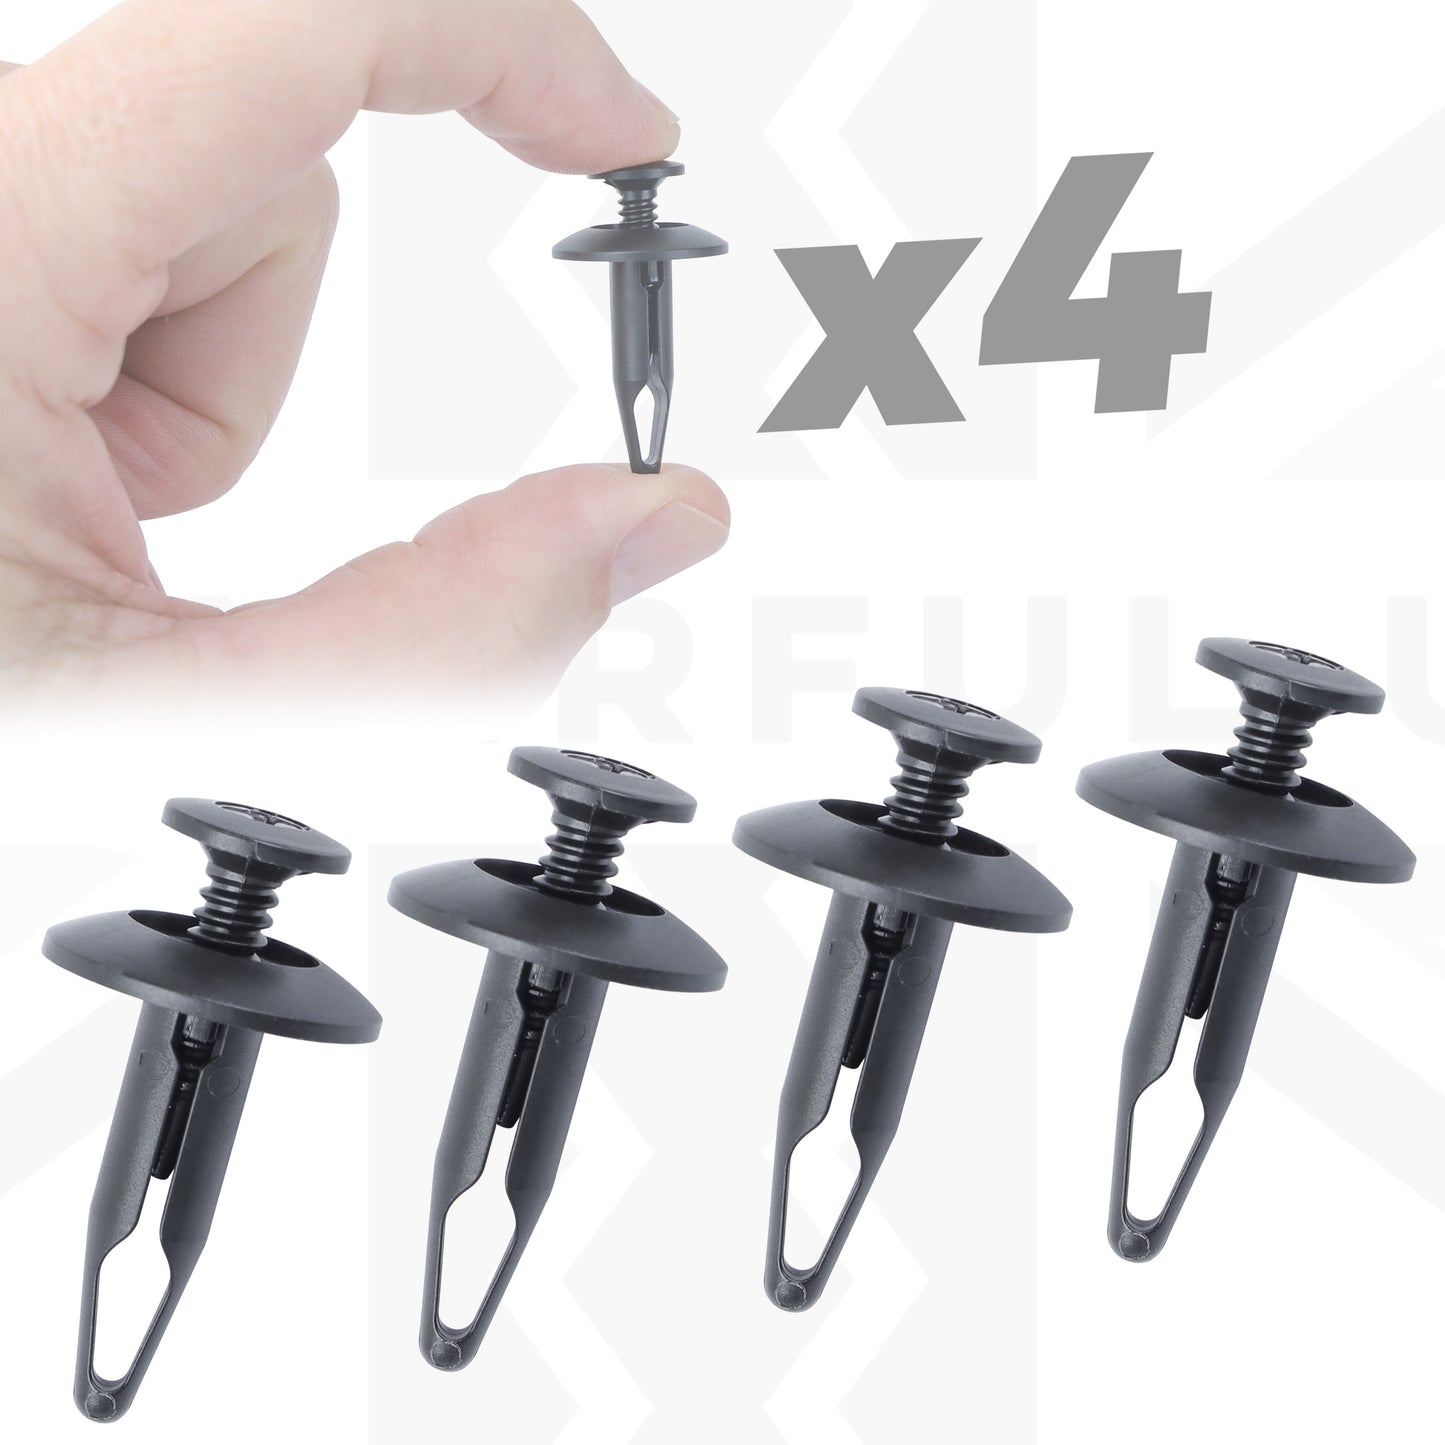 4x Clips (6.3x22mm Plastic Push Pin type) for Land Rover Discovery 4 - Genuine